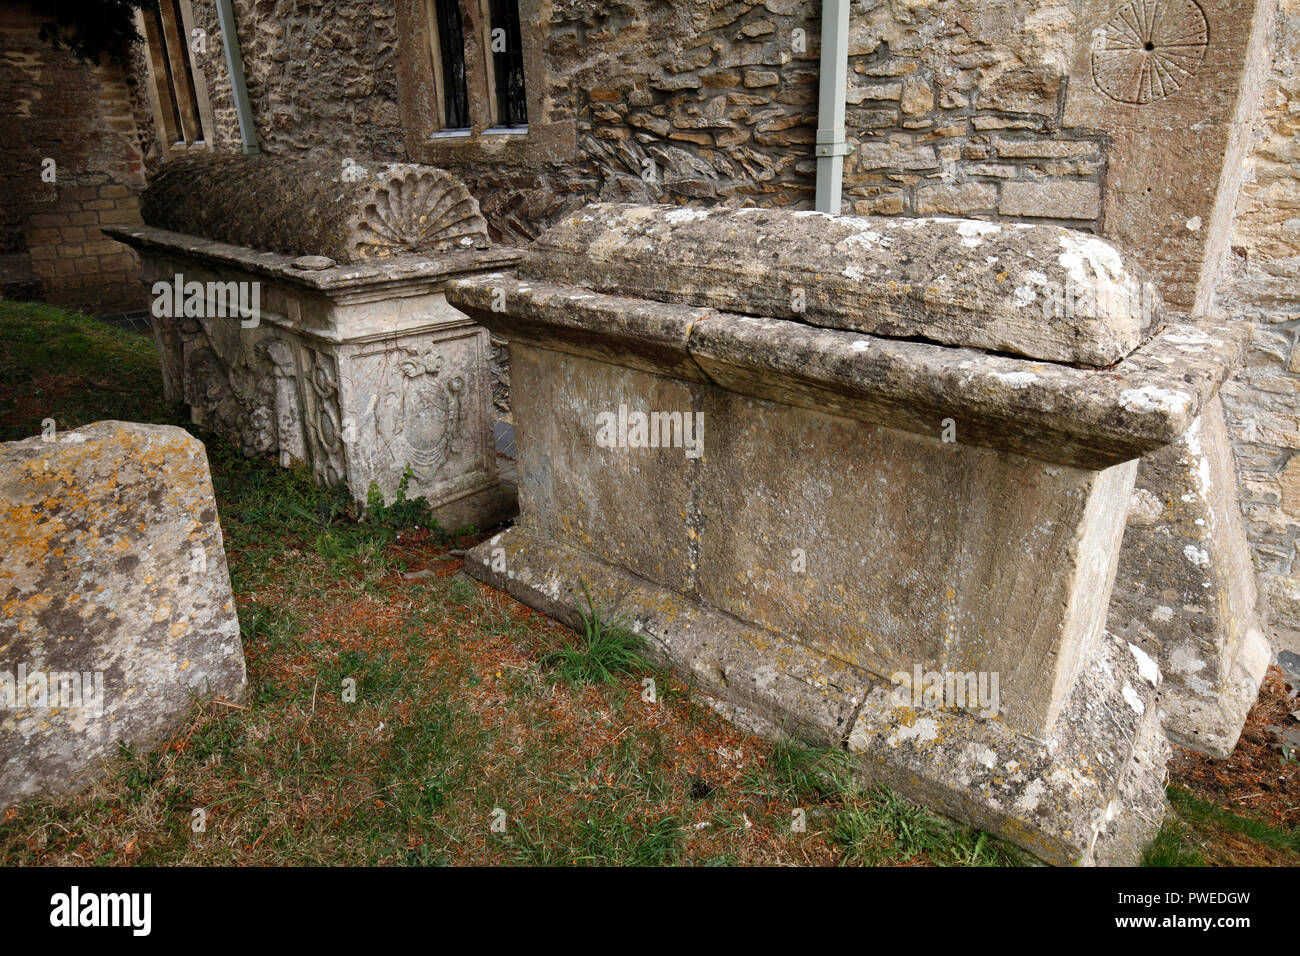 Roll topped wool-stapler 17th century tomb. St James the Great, Fulbrook church. Oxfordshire. Stock Photo